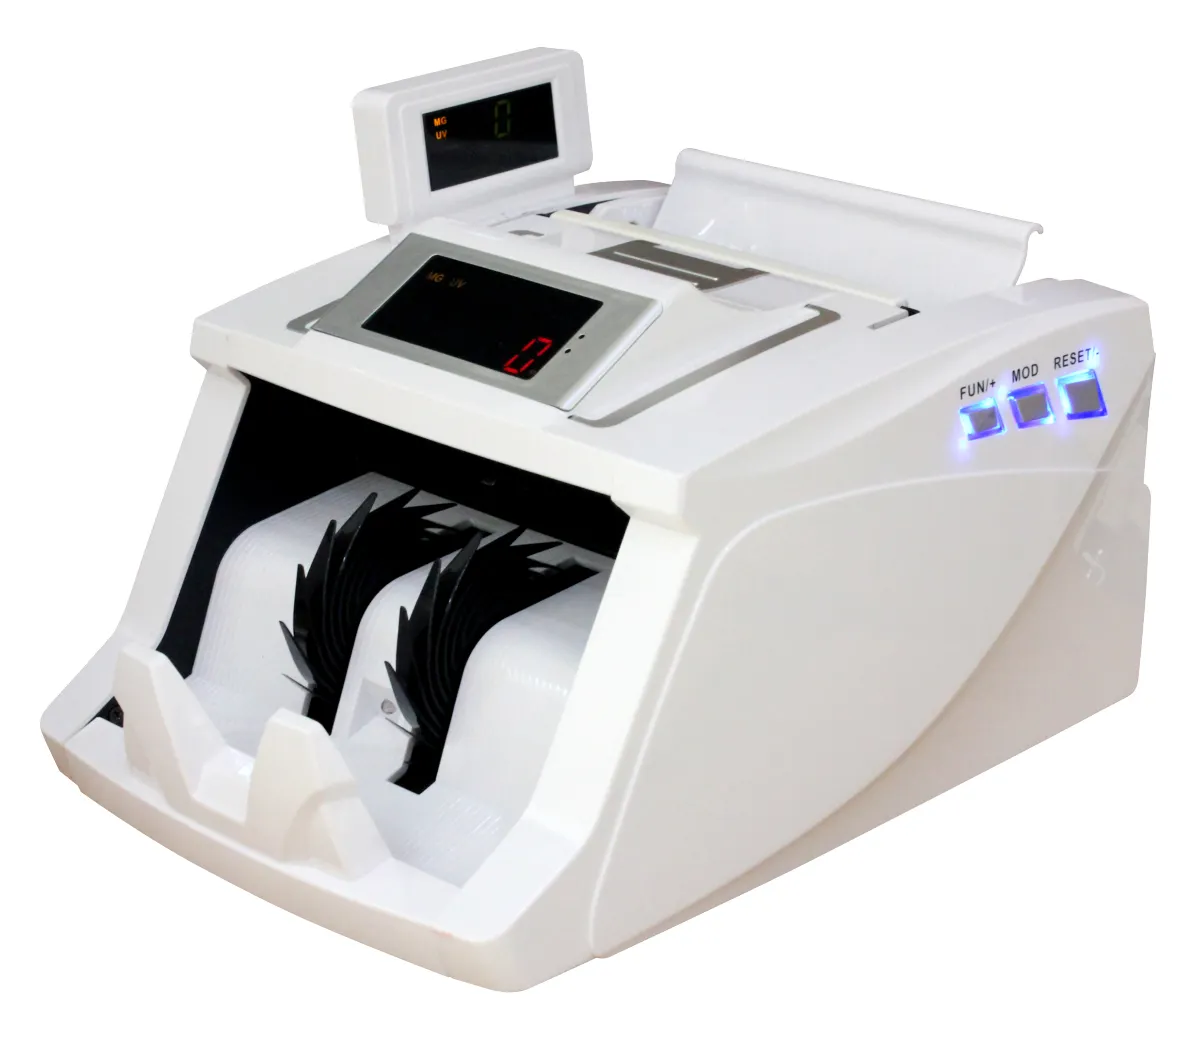 WL-C01 Intelligent money count two display portable mg uv cash bill currency note counter machine